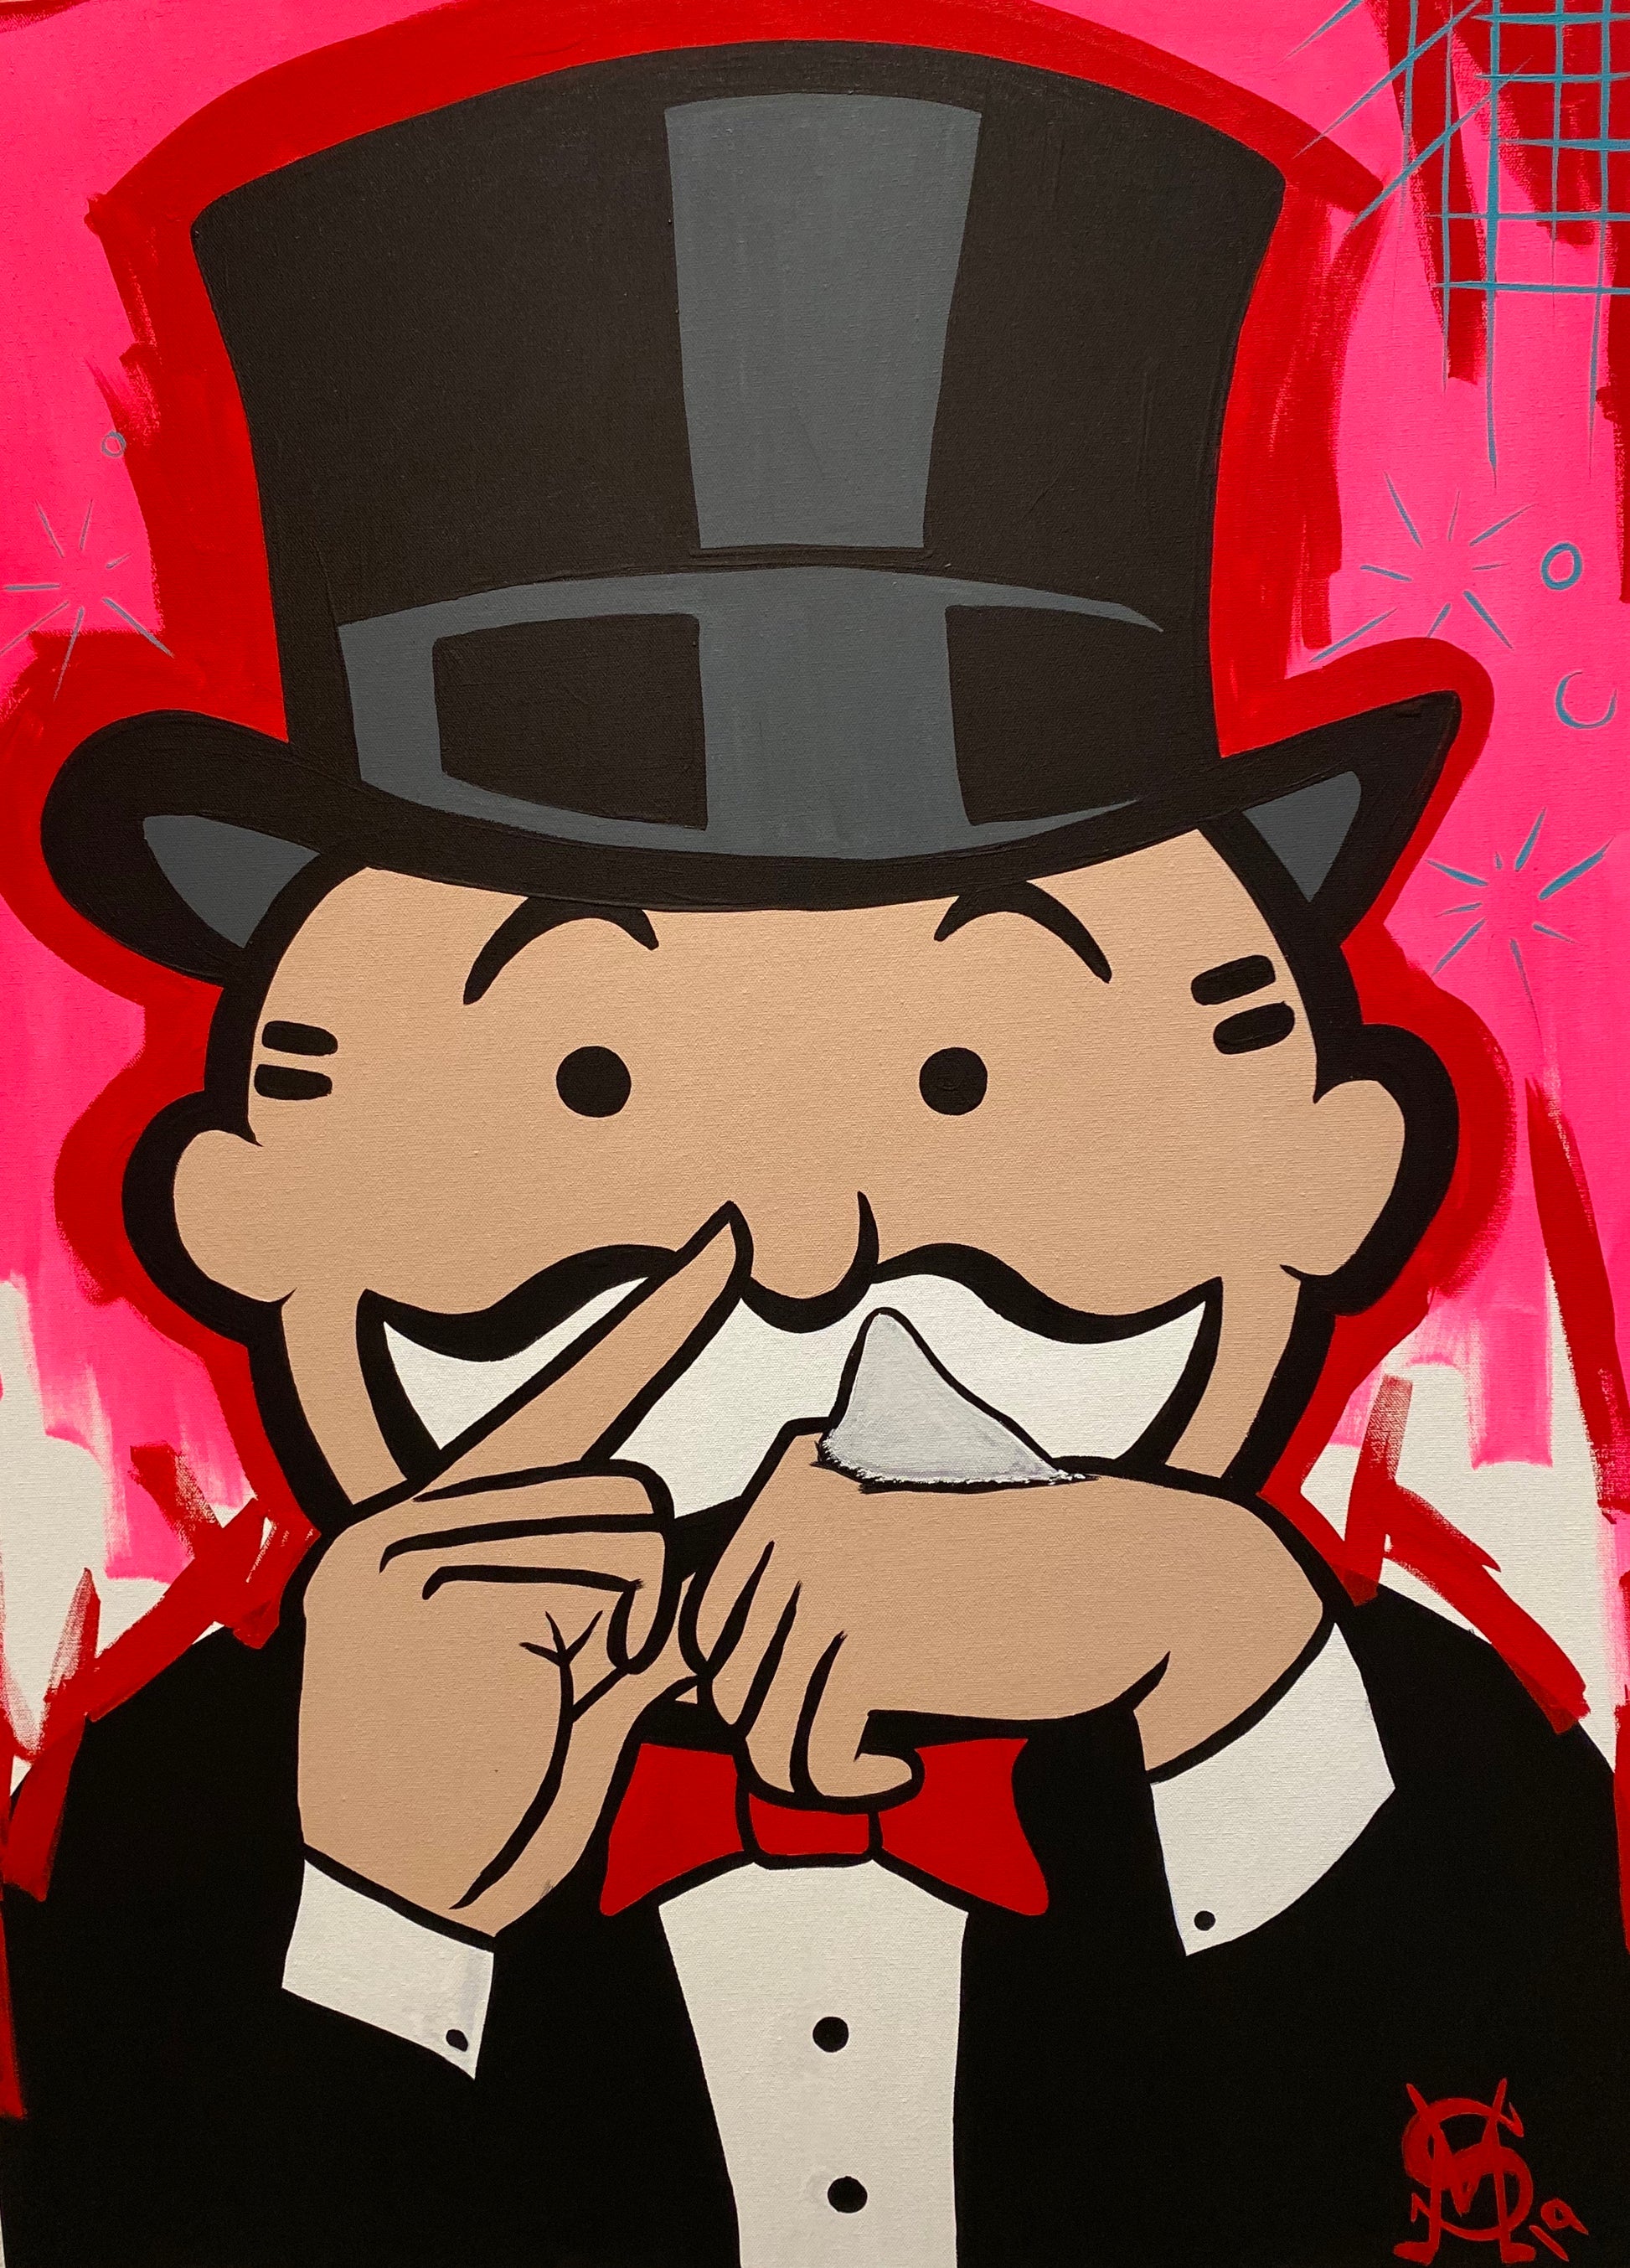 Sinister Monopoly “Nose Candy” Original Canvas